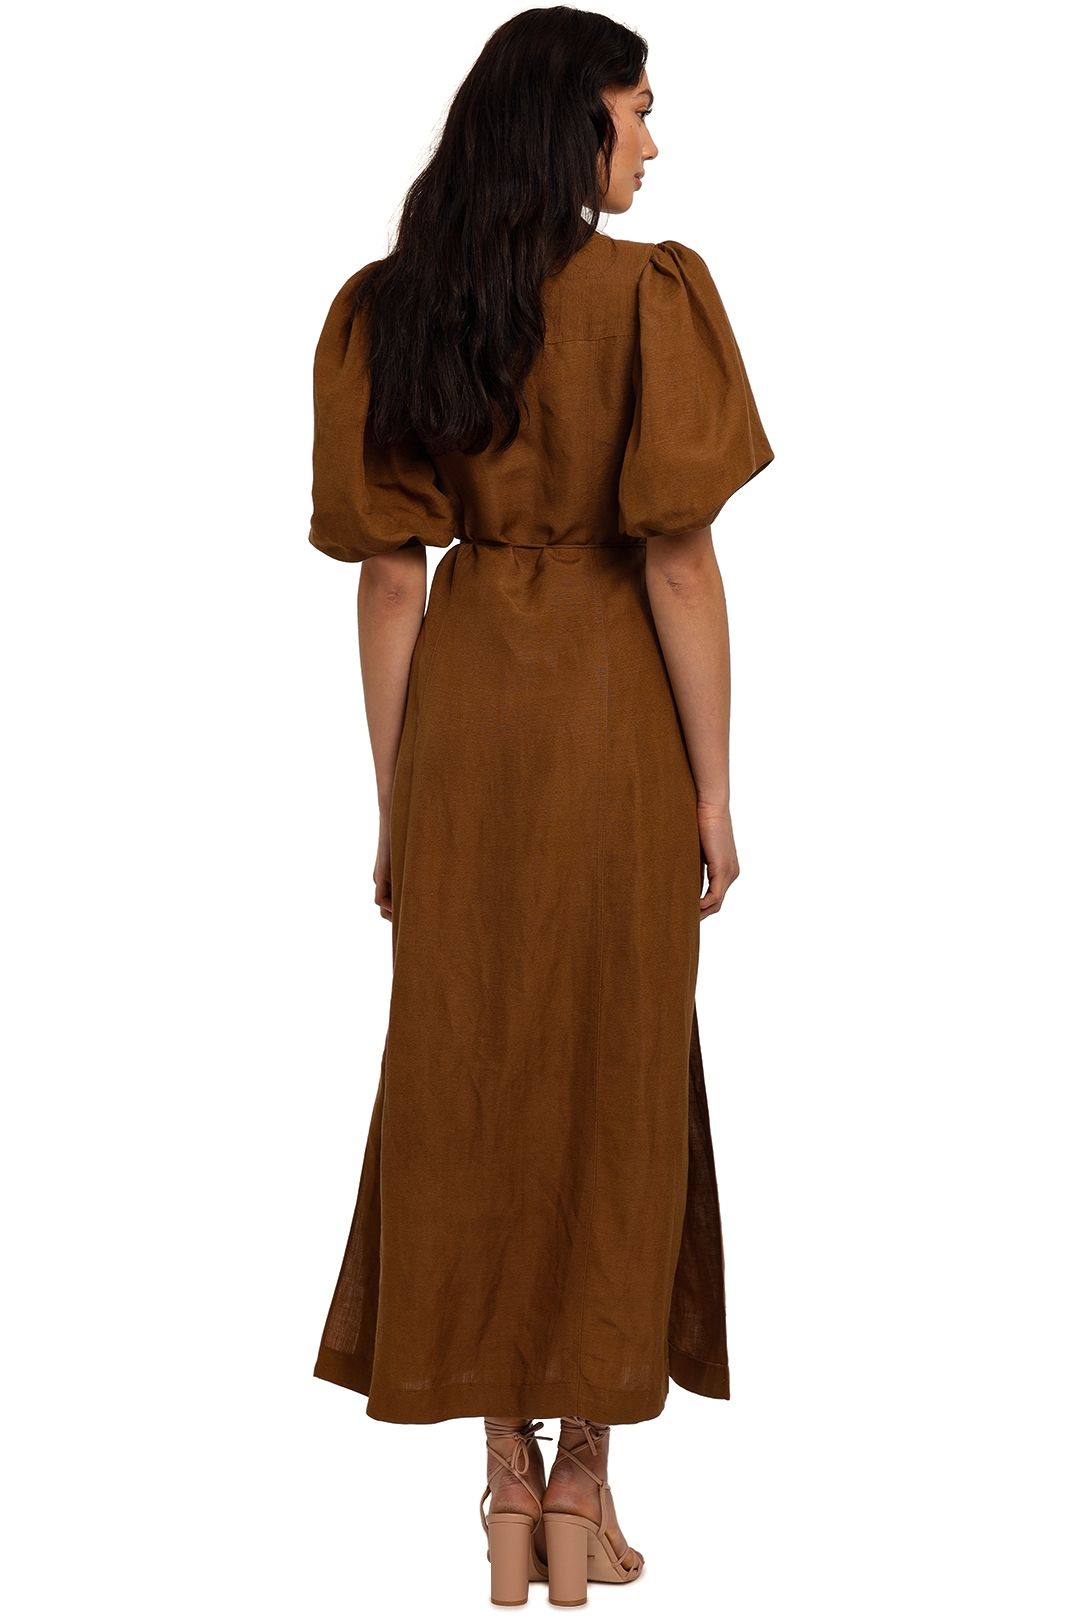 Significant Other Hazel Dress Chocolate